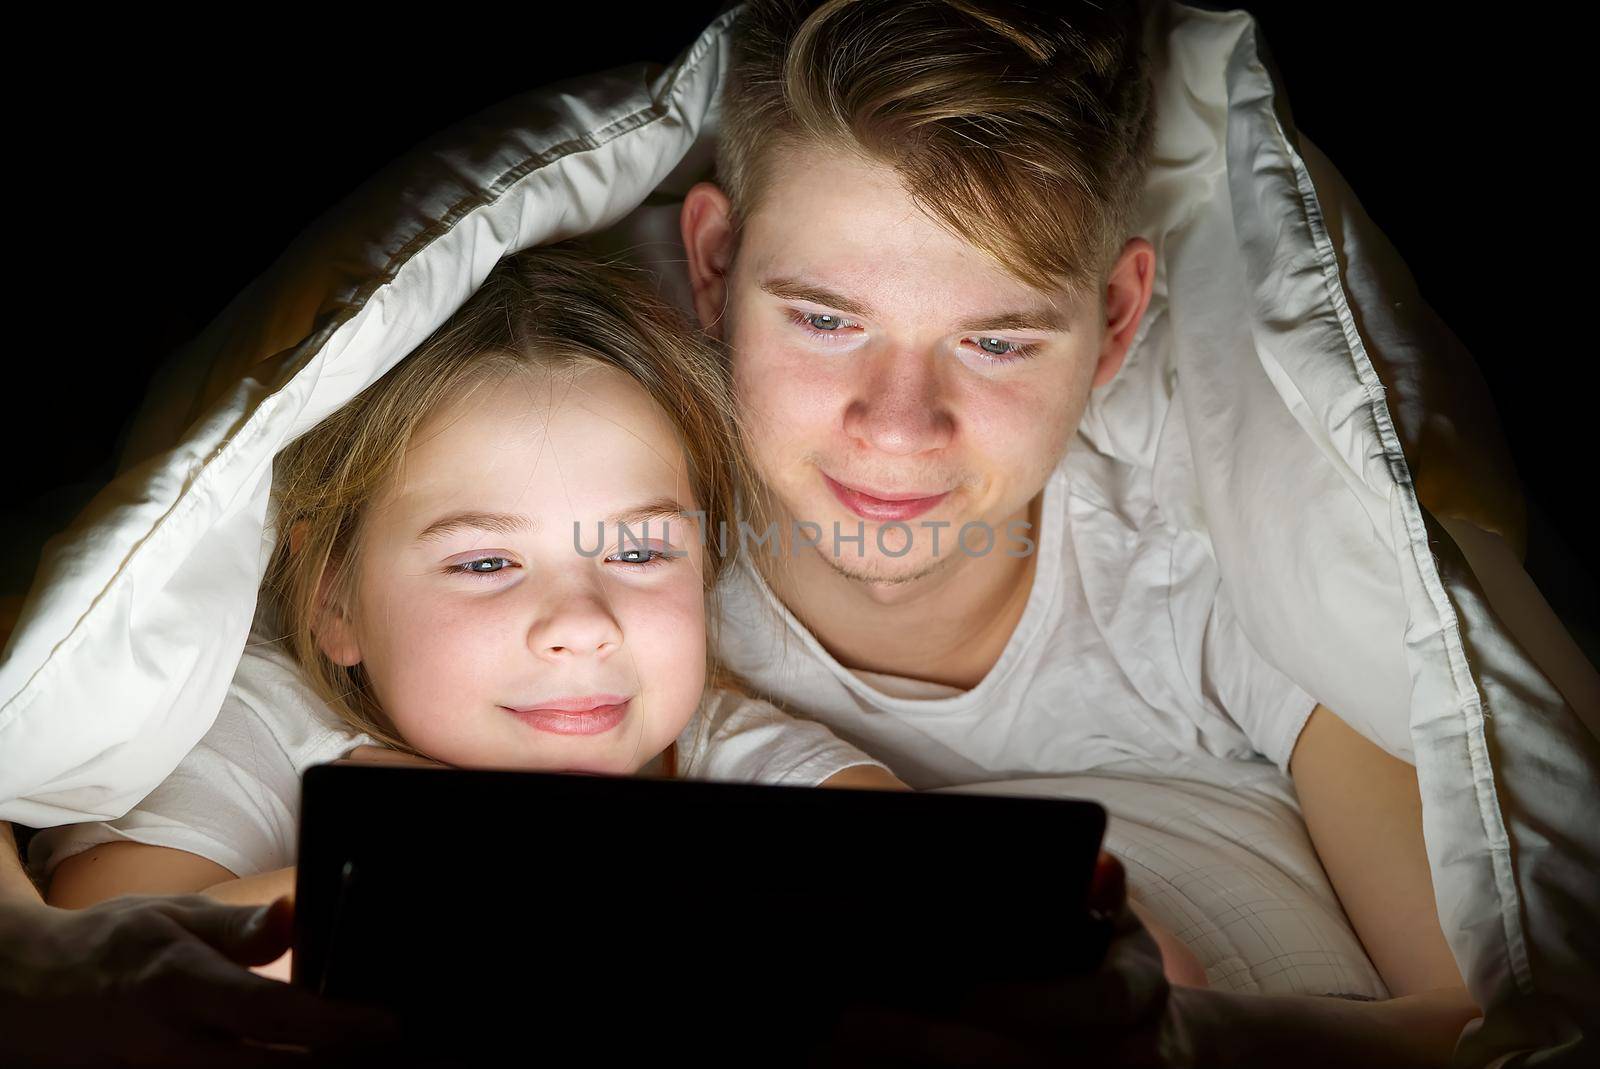 children play games on a tablet at night under a blanket, children watching video on tablet. communication through social networks. by PhotoTime